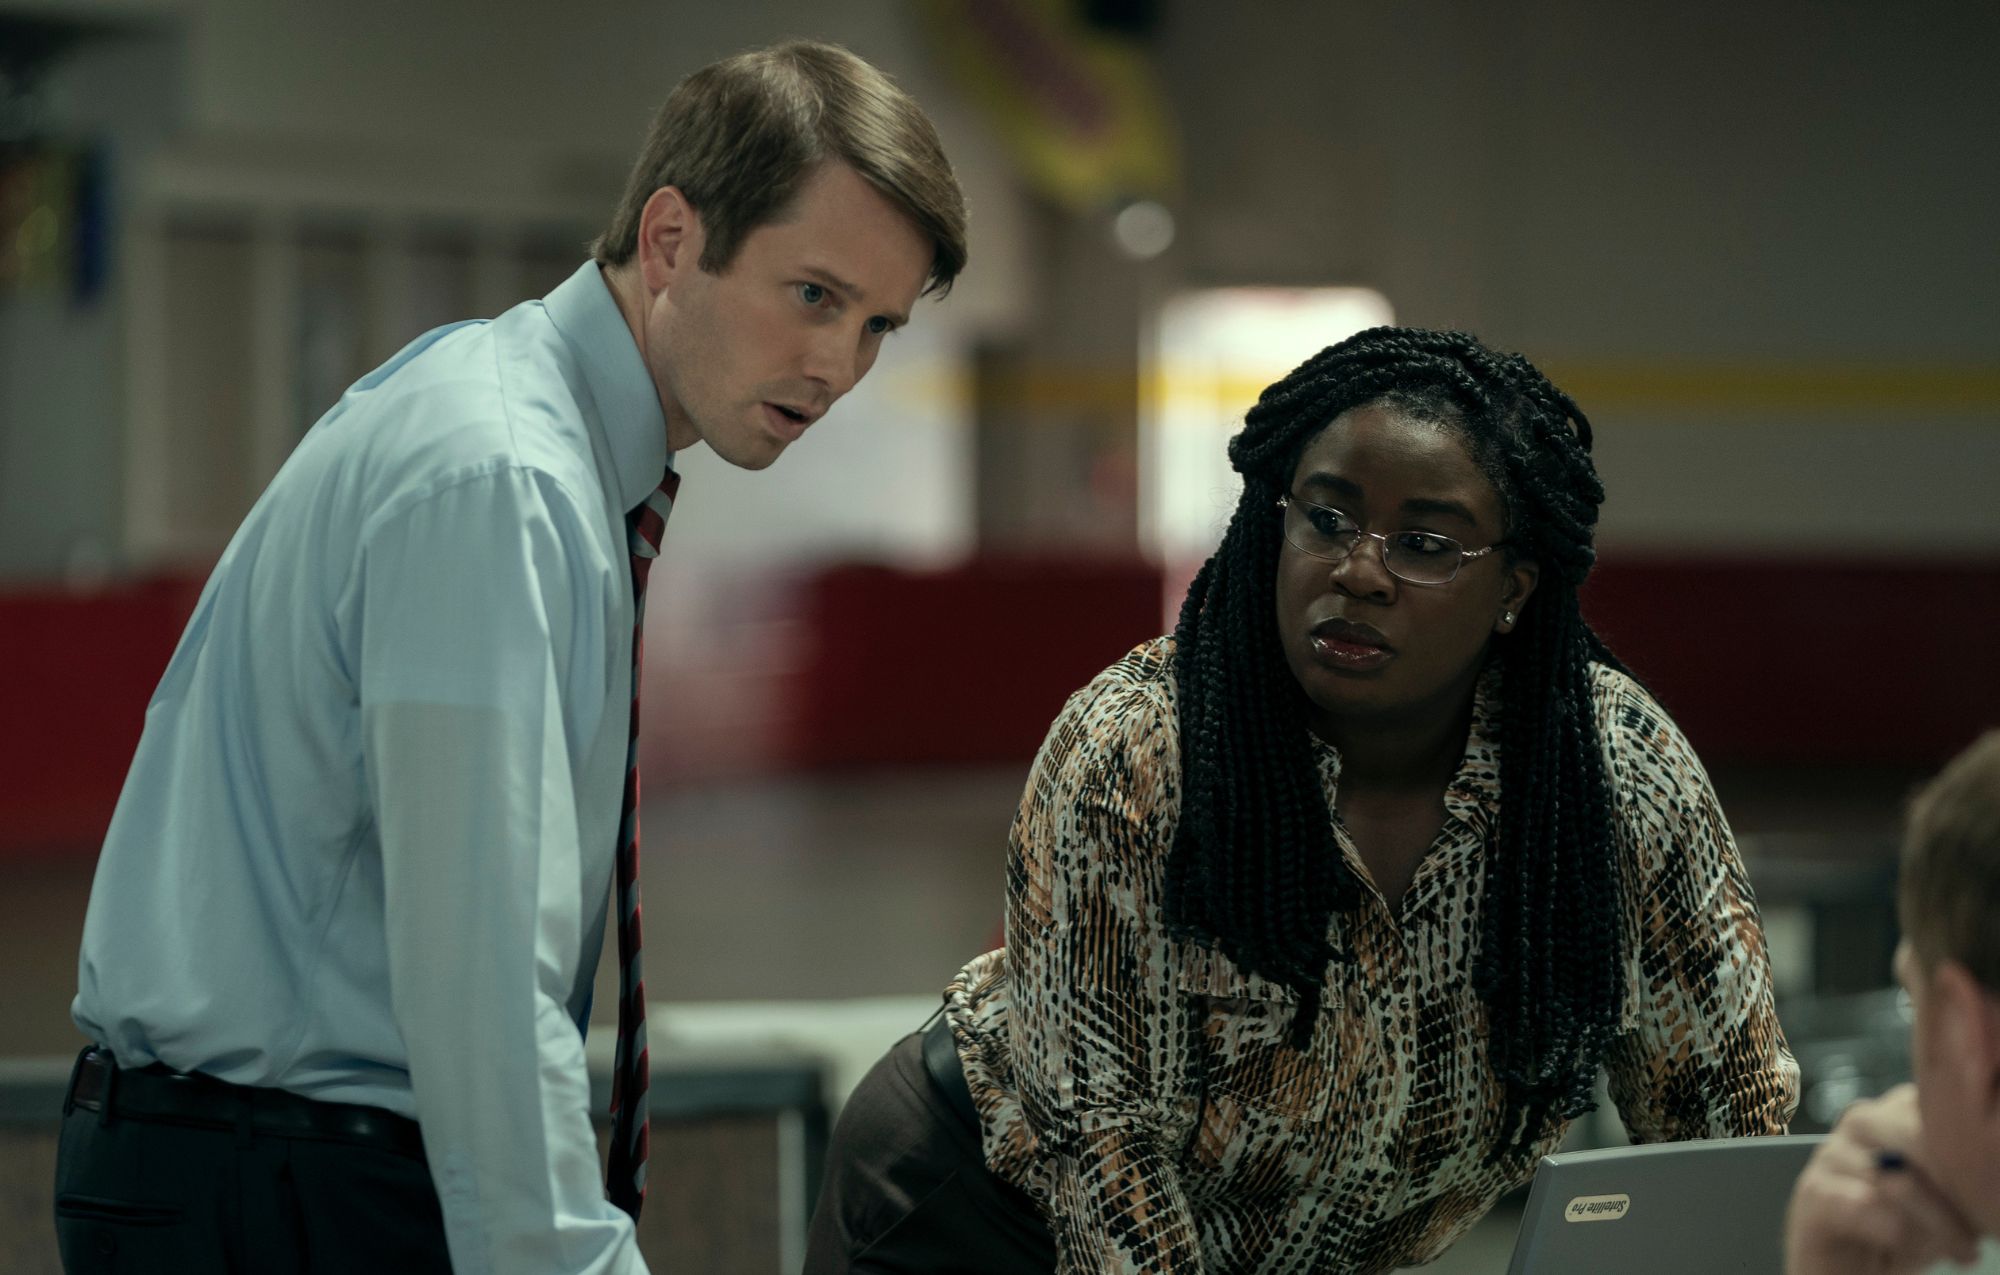 'Orange Is The New Black' star Uzo Aduba plays a federal lawyer in 'Painkiller'